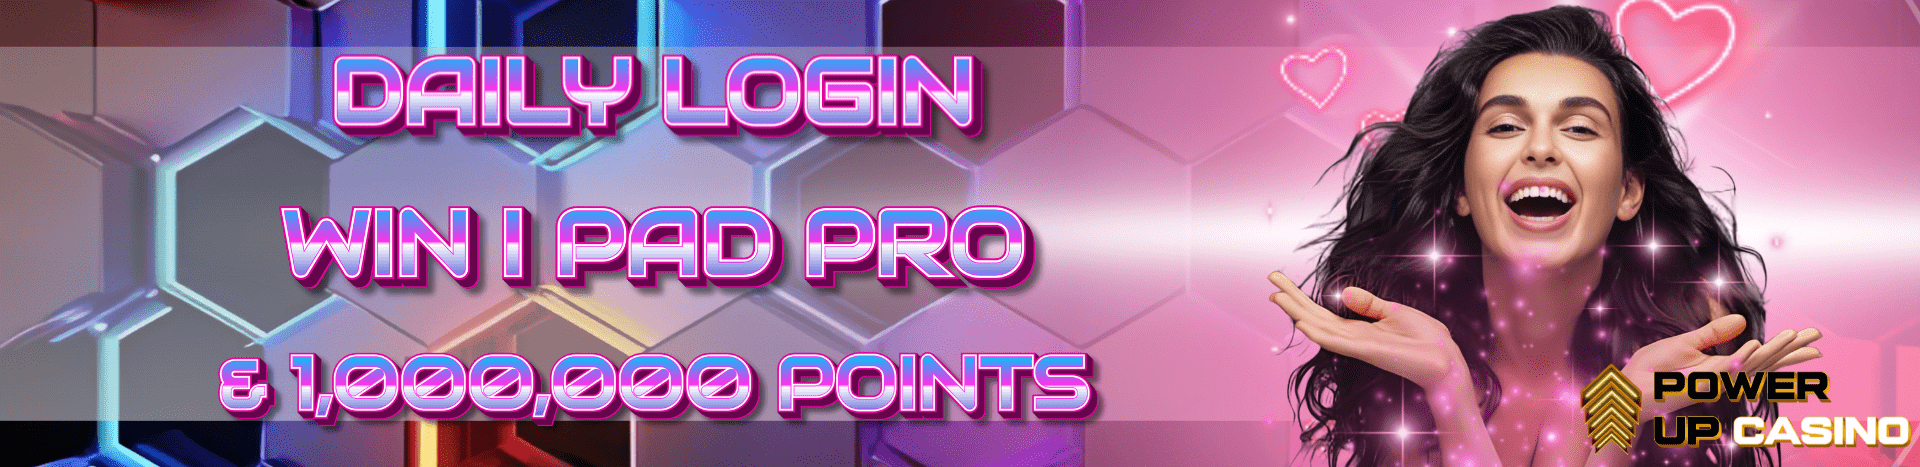 Power Up Daily Login: Win iPad Pro and 1000000 Points